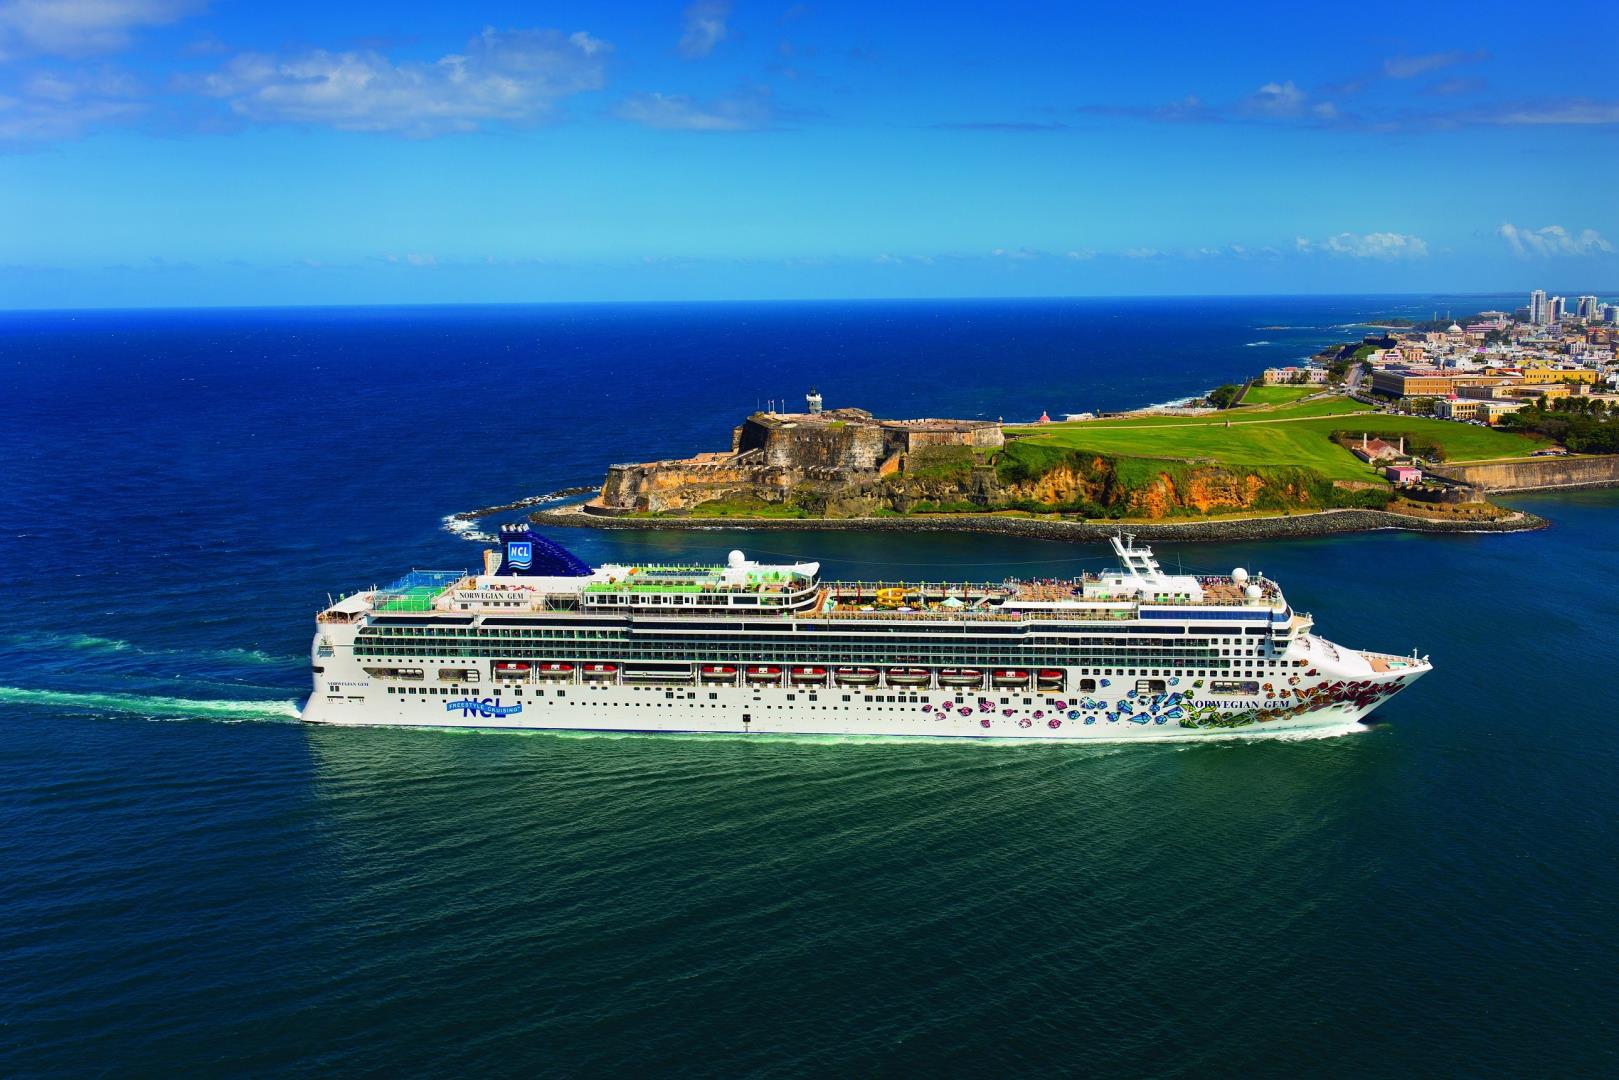 11-day Cruise to Panama Canal: Mexico, Costa Rica & Belize from Miami, Florida on Norwegian Gem